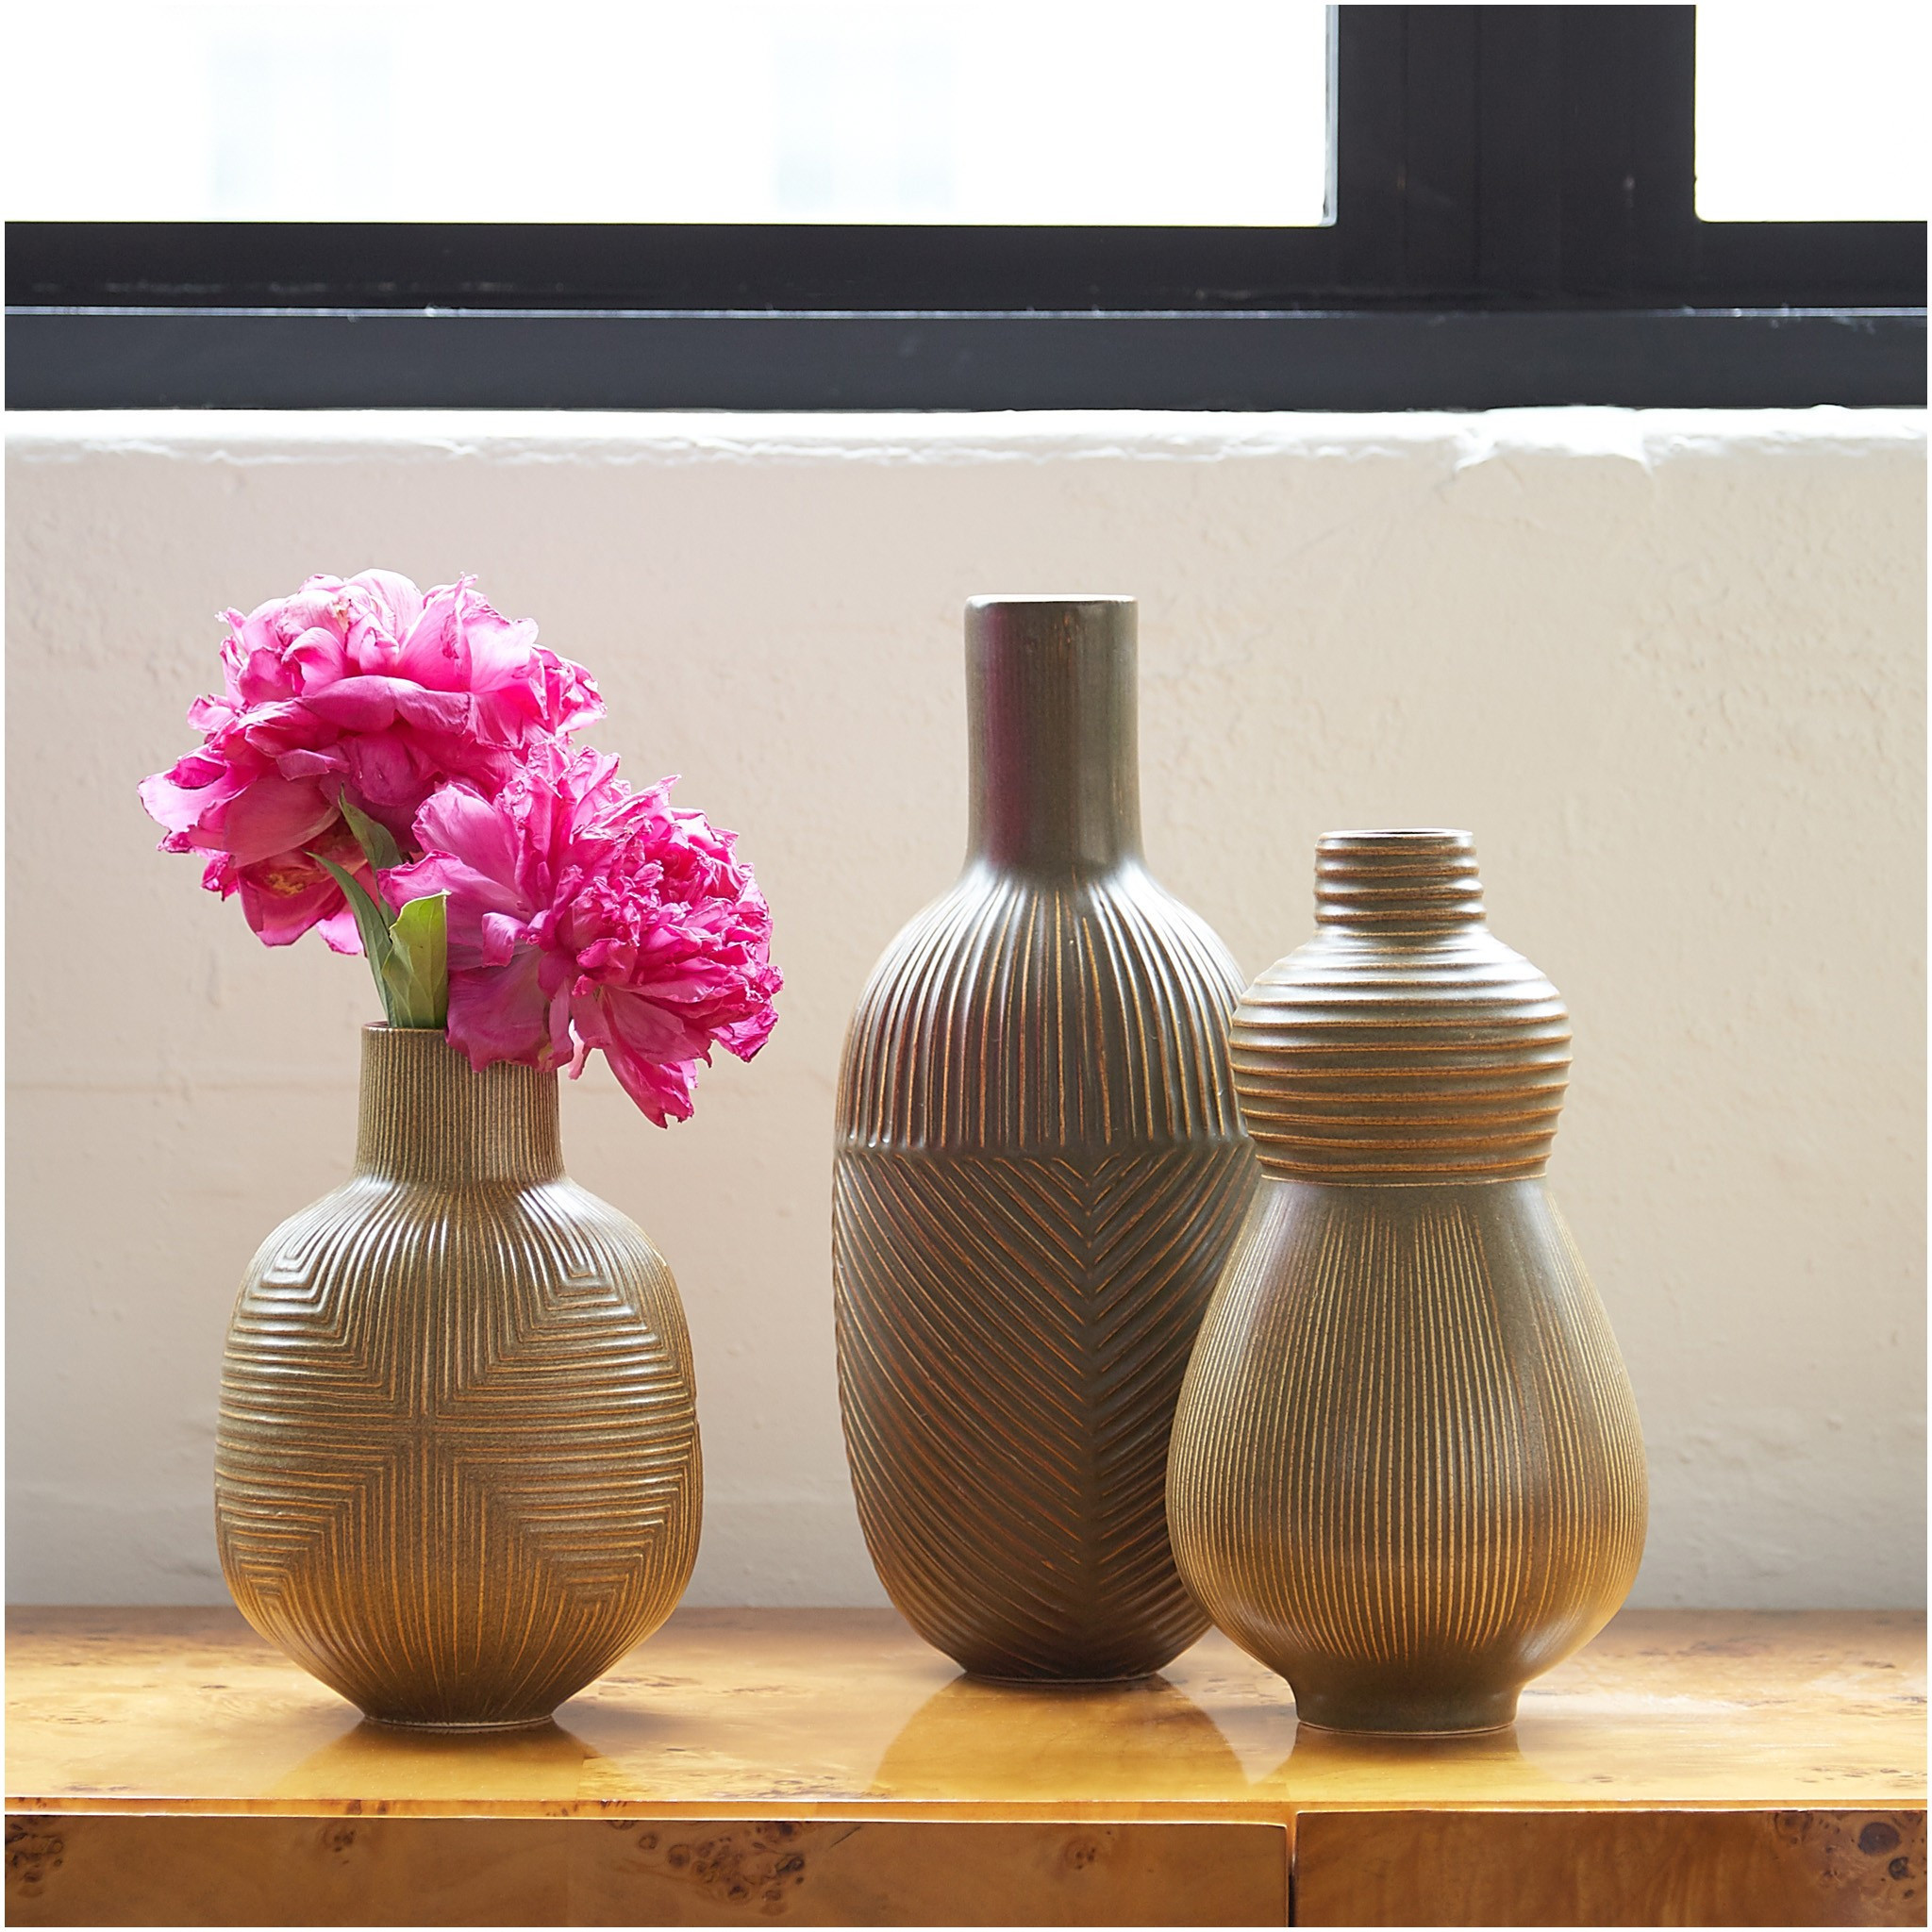 29 Stylish Decorative Vases with Lids 2023 free download decorative vases with lids of 21 beau decorative vases anciendemutu org within modern decor pottery relief vases 2015 styled b jonathan adlerh i 18d